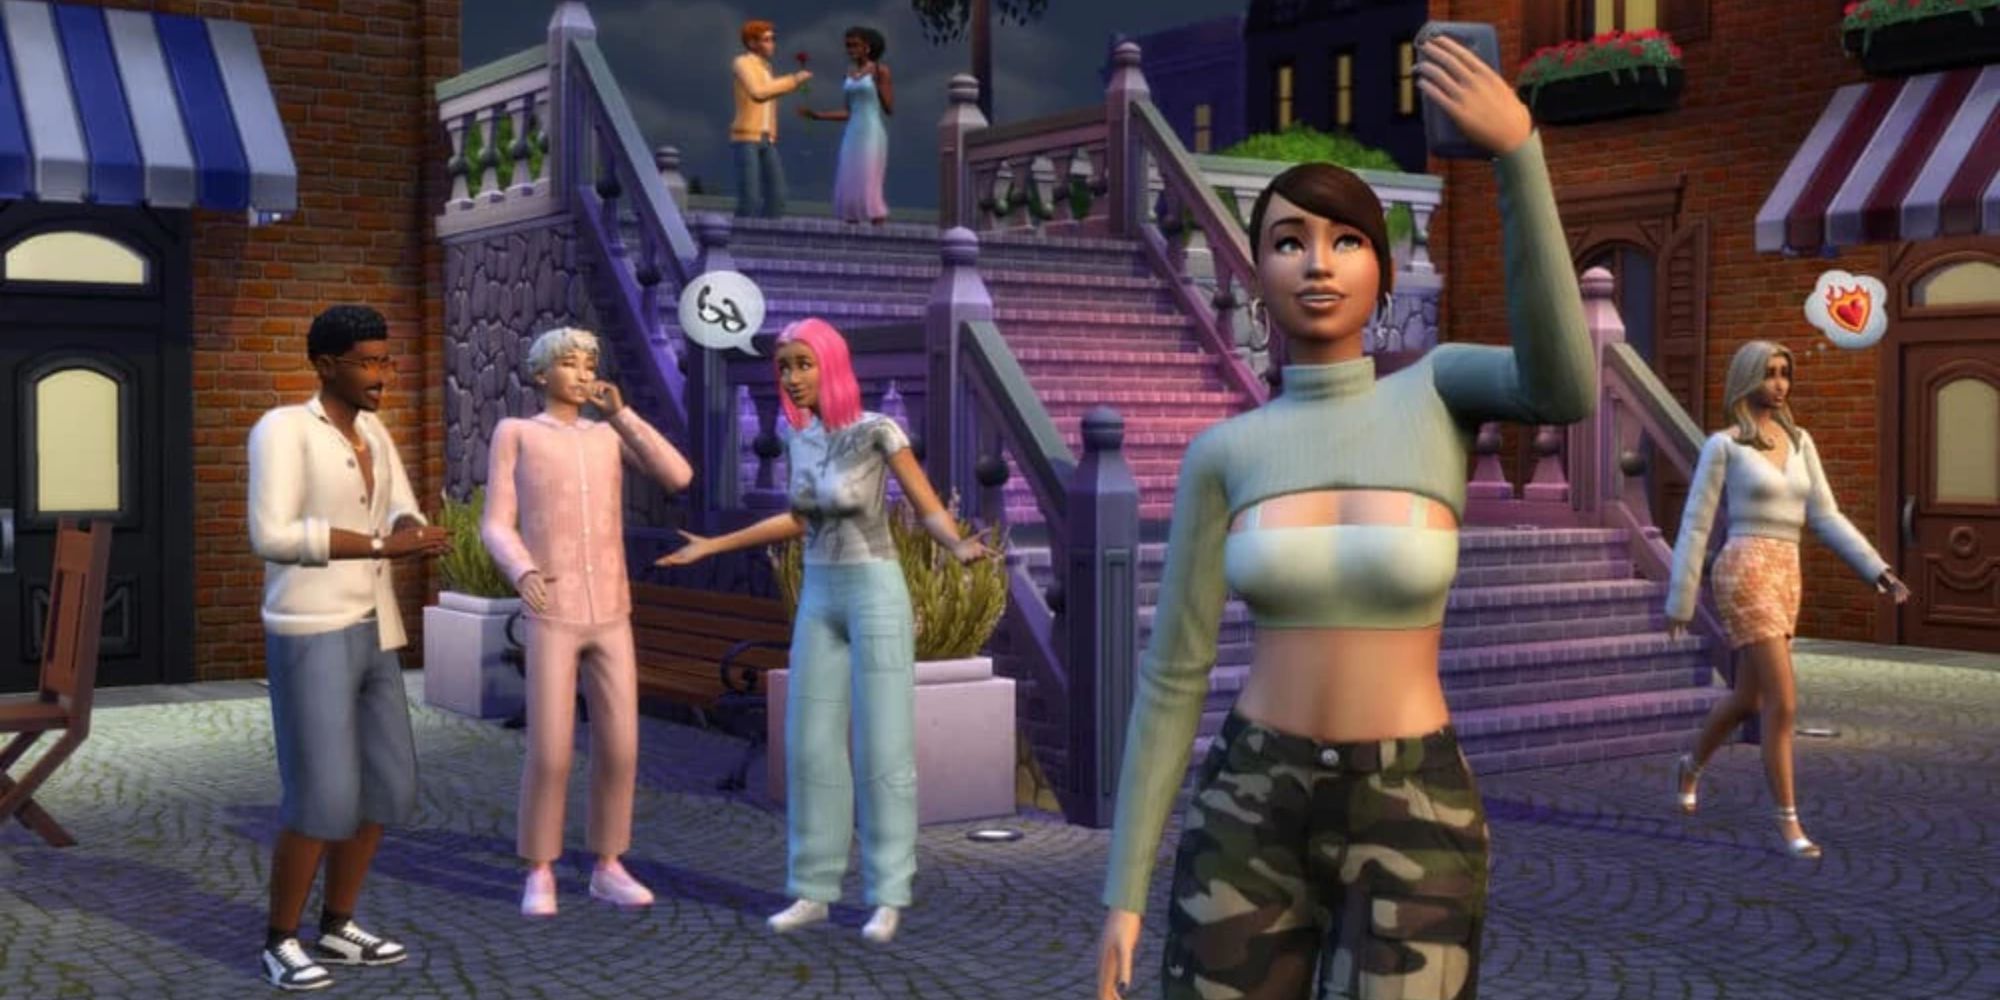 The Sims 4 Moonlight Chic Kit: A woman in army pants and a cropped green top takes a selfie on a Parisian style street, three people chat and laugh behind her